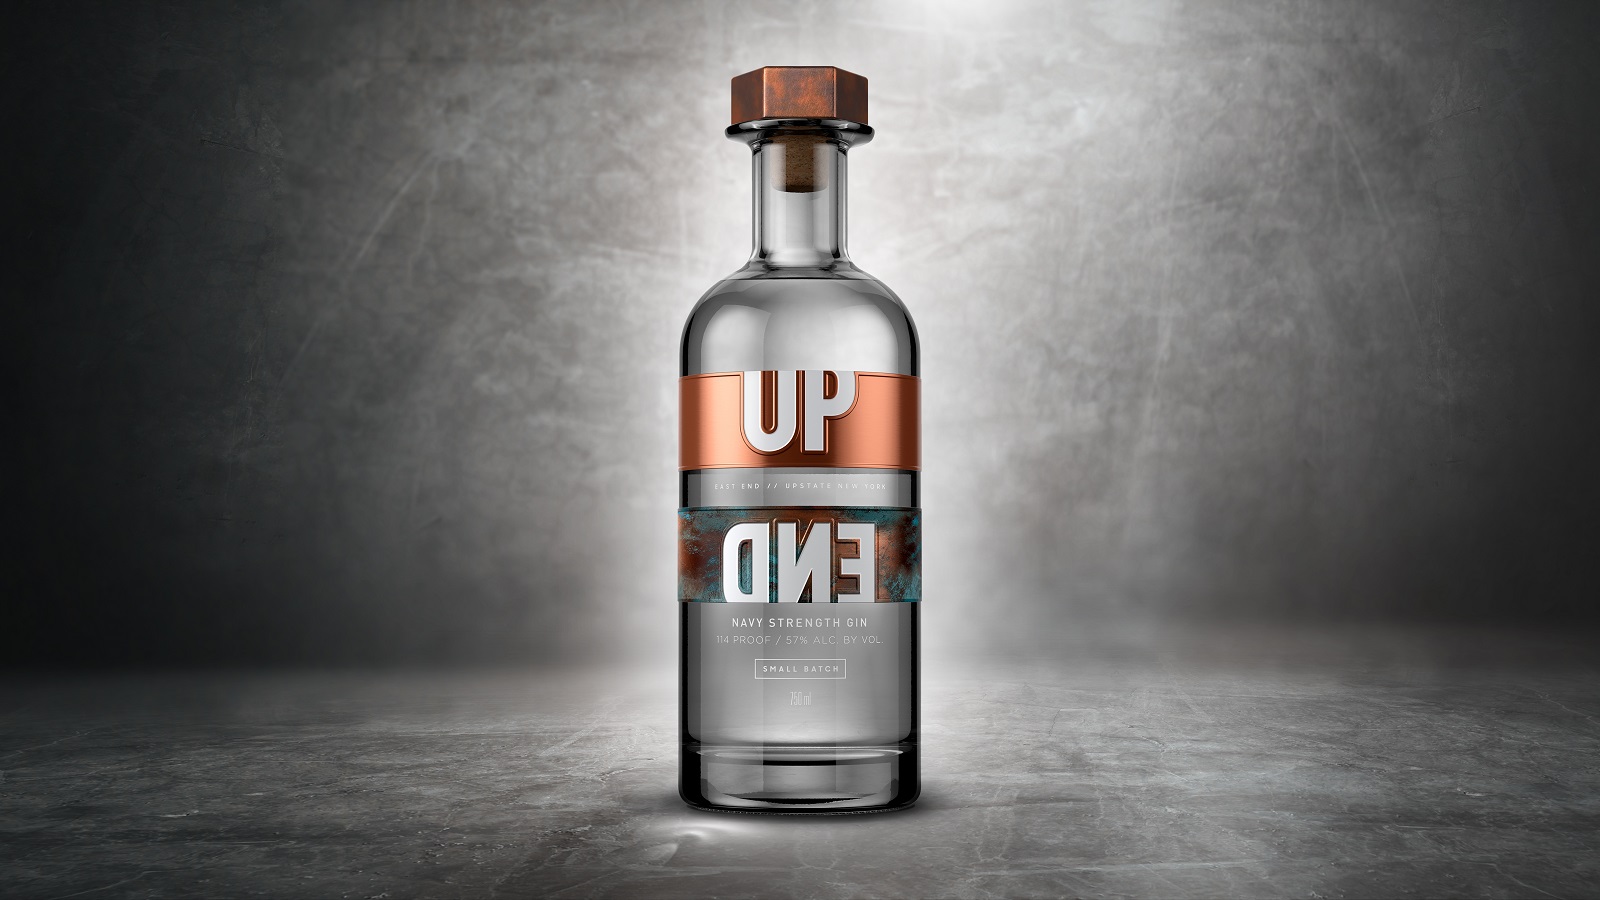 UPEND Gin Gets Flavored with Nude Brand Creation’s Creativity